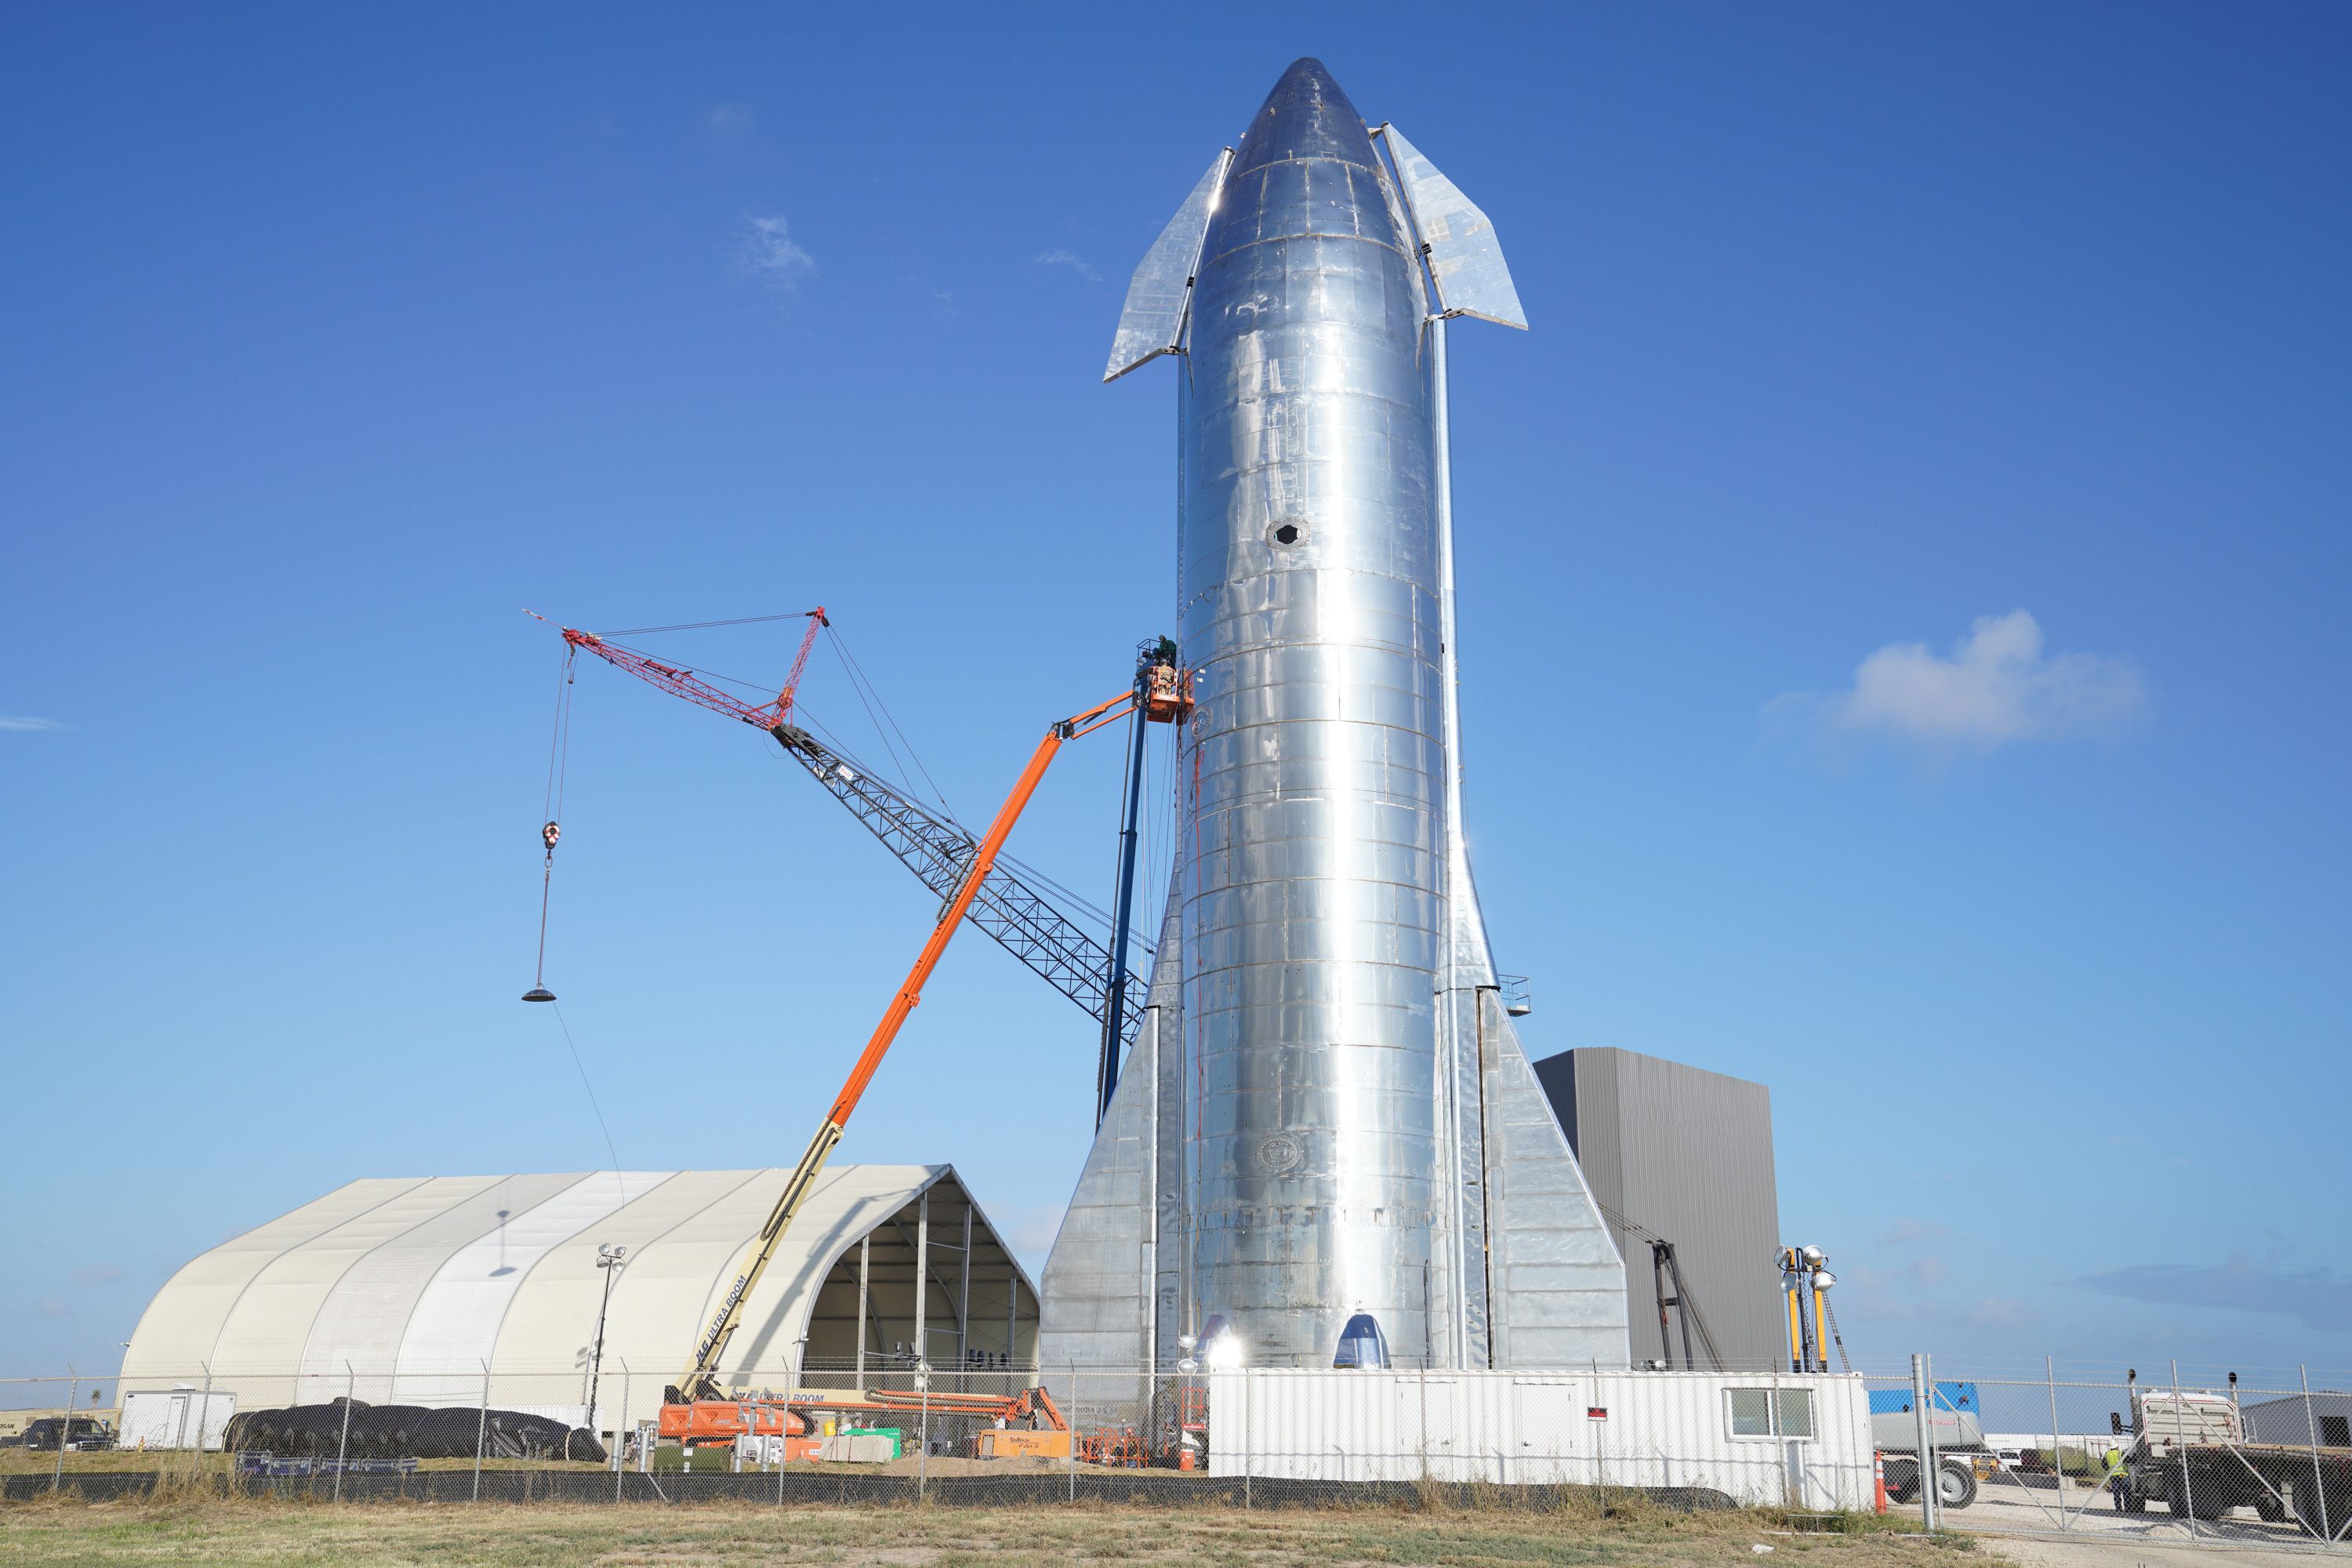 Gallery: SpaceX's Starship Mk1 spacecraft prototype in picture